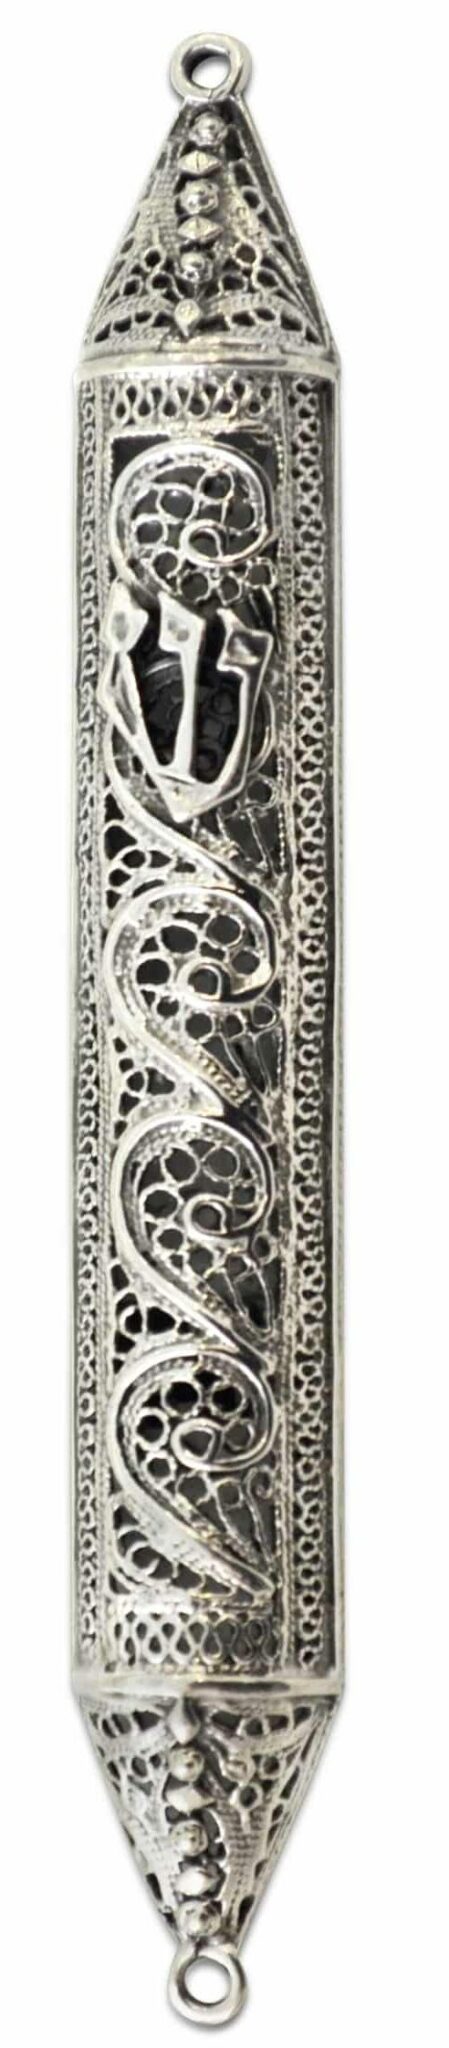 Sterling Silver Mezuzah Case with Filigree embellishments